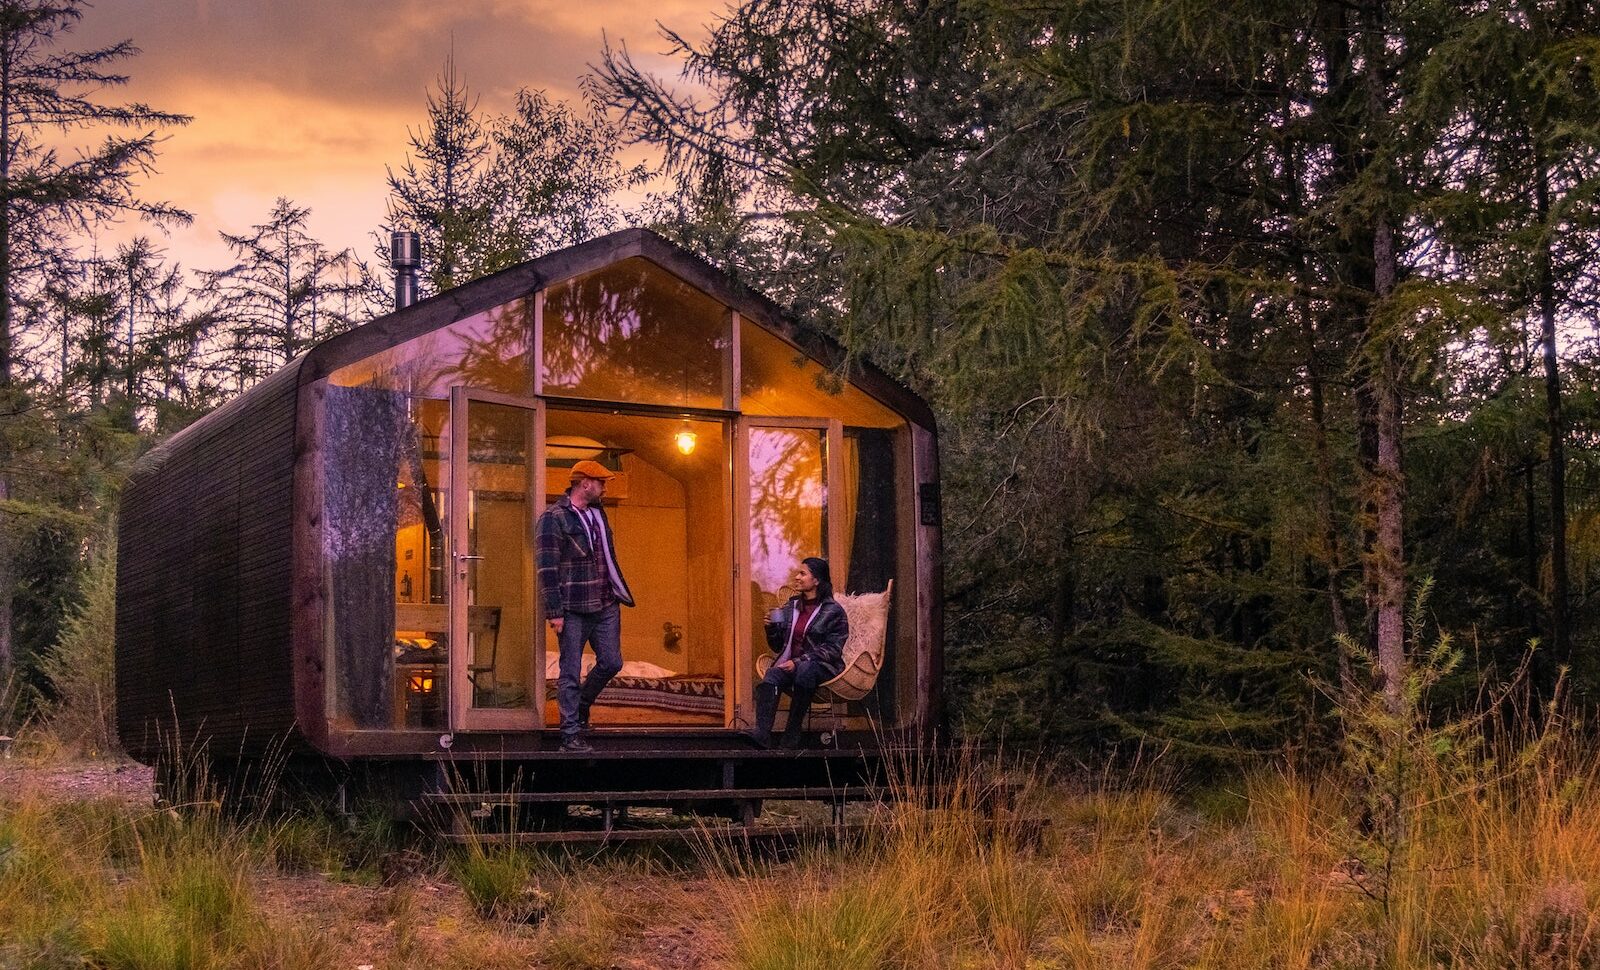 Building An Off-Grid Home: Design Considerations And Sustainable Materials